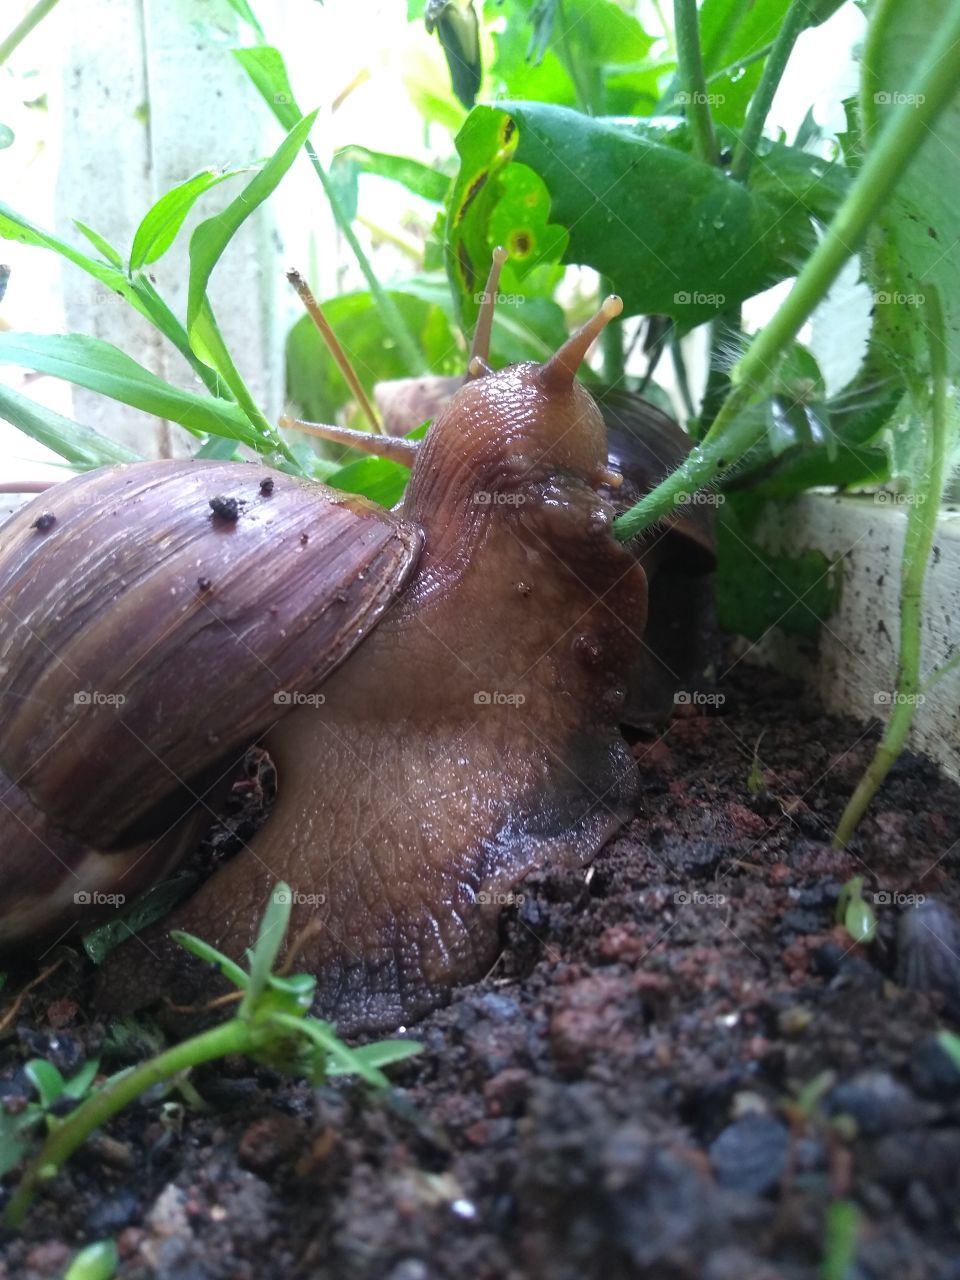 A close-up of a Snail out of its shell eating a leaf of grass in a garden